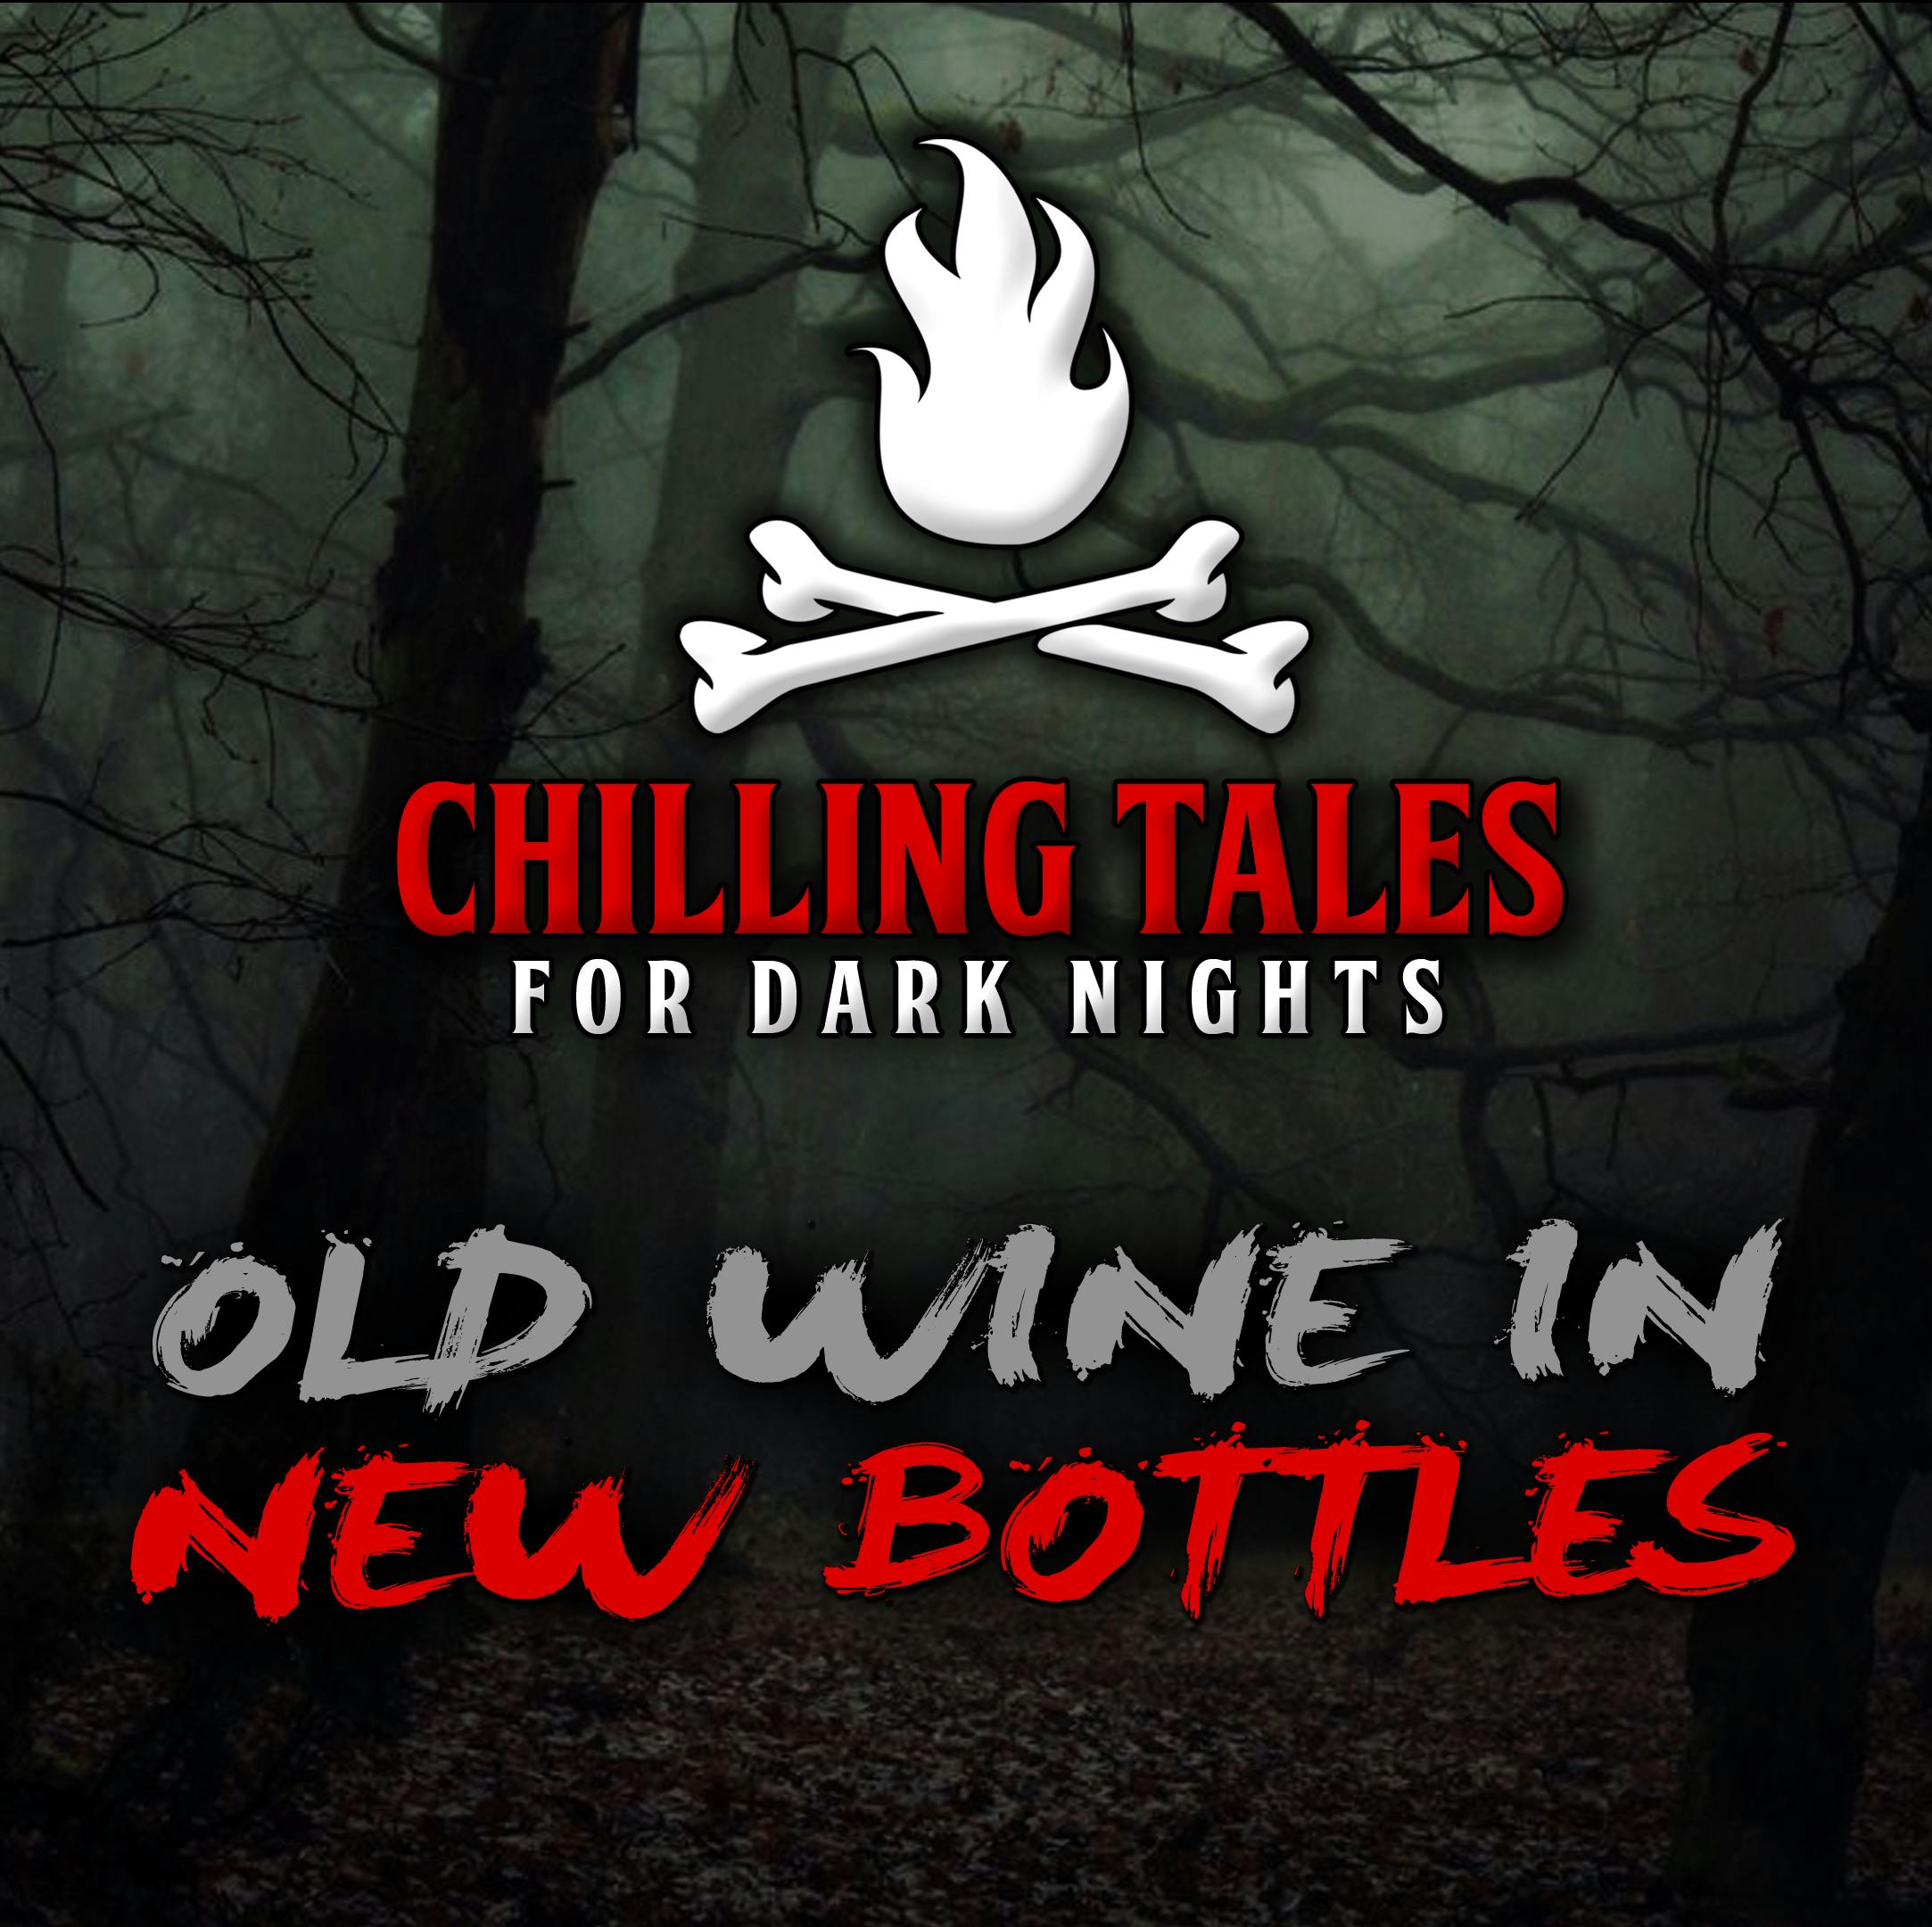 73: Old Wine in New Bottles – Chilling Tales for Dark Nights